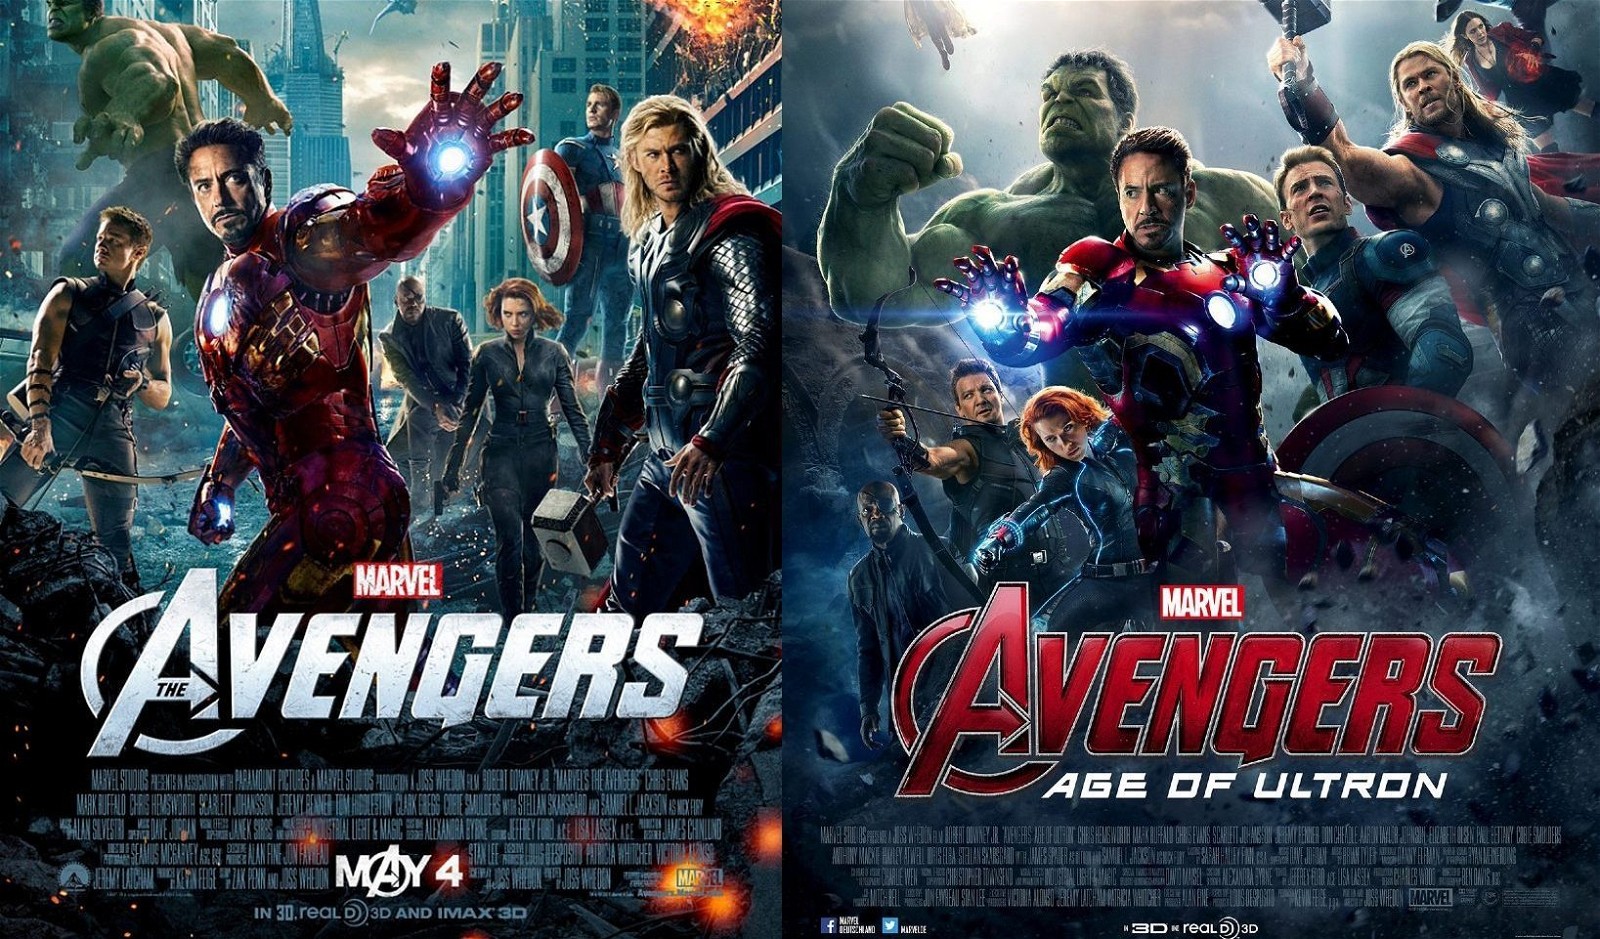 Joss Whedon directed the first two Avengers films